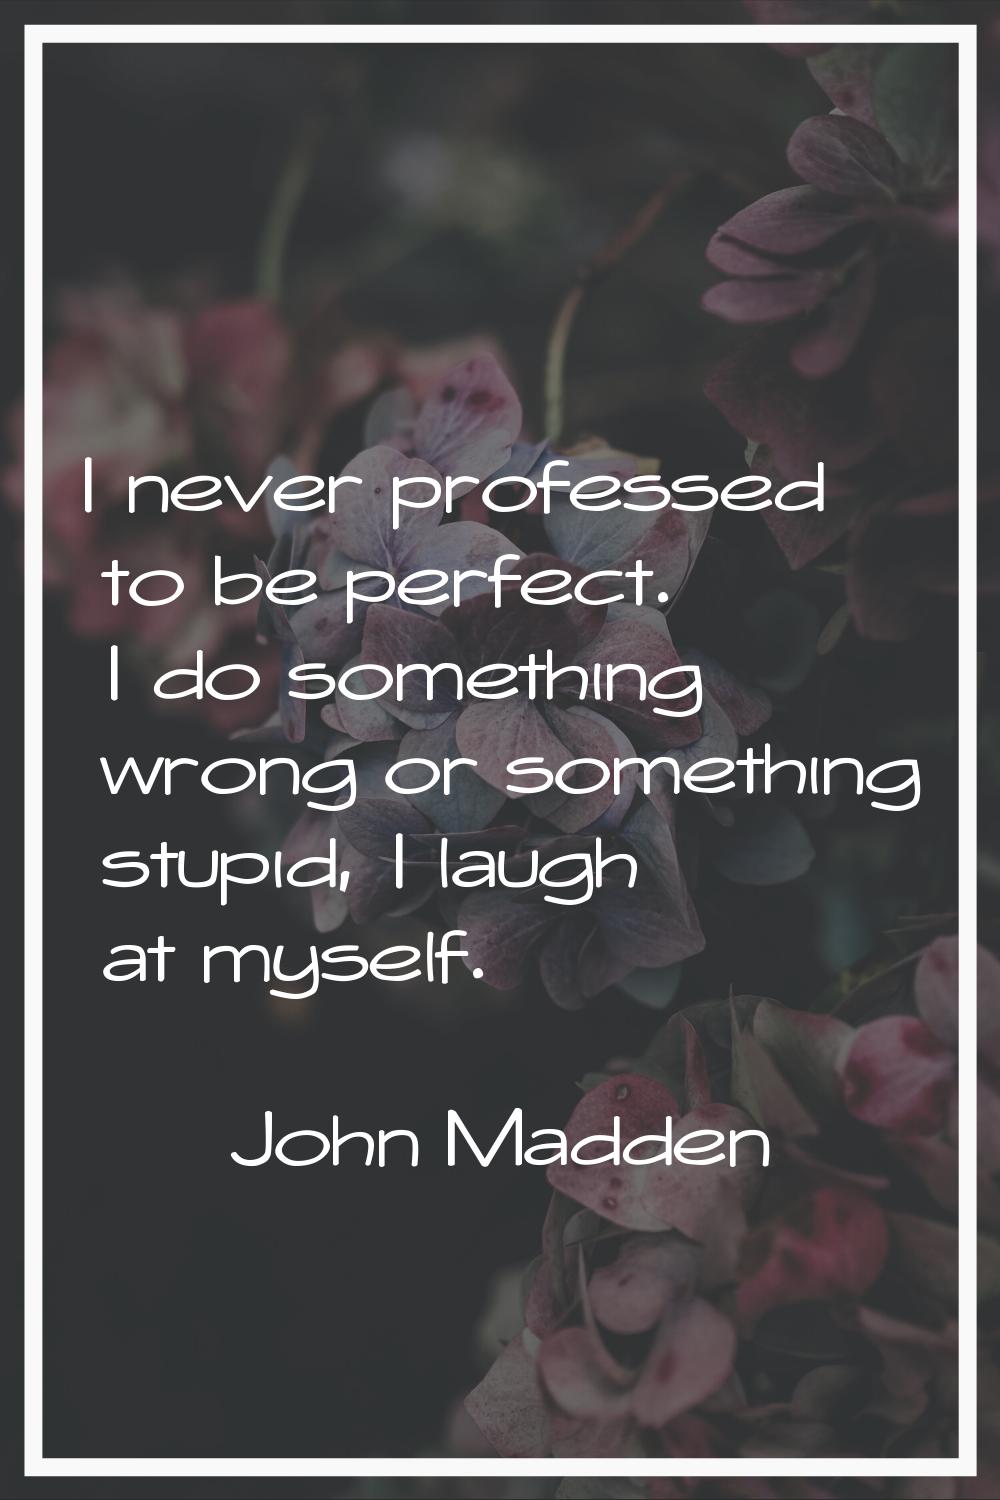 I never professed to be perfect. I do something wrong or something stupid, I laugh at myself.